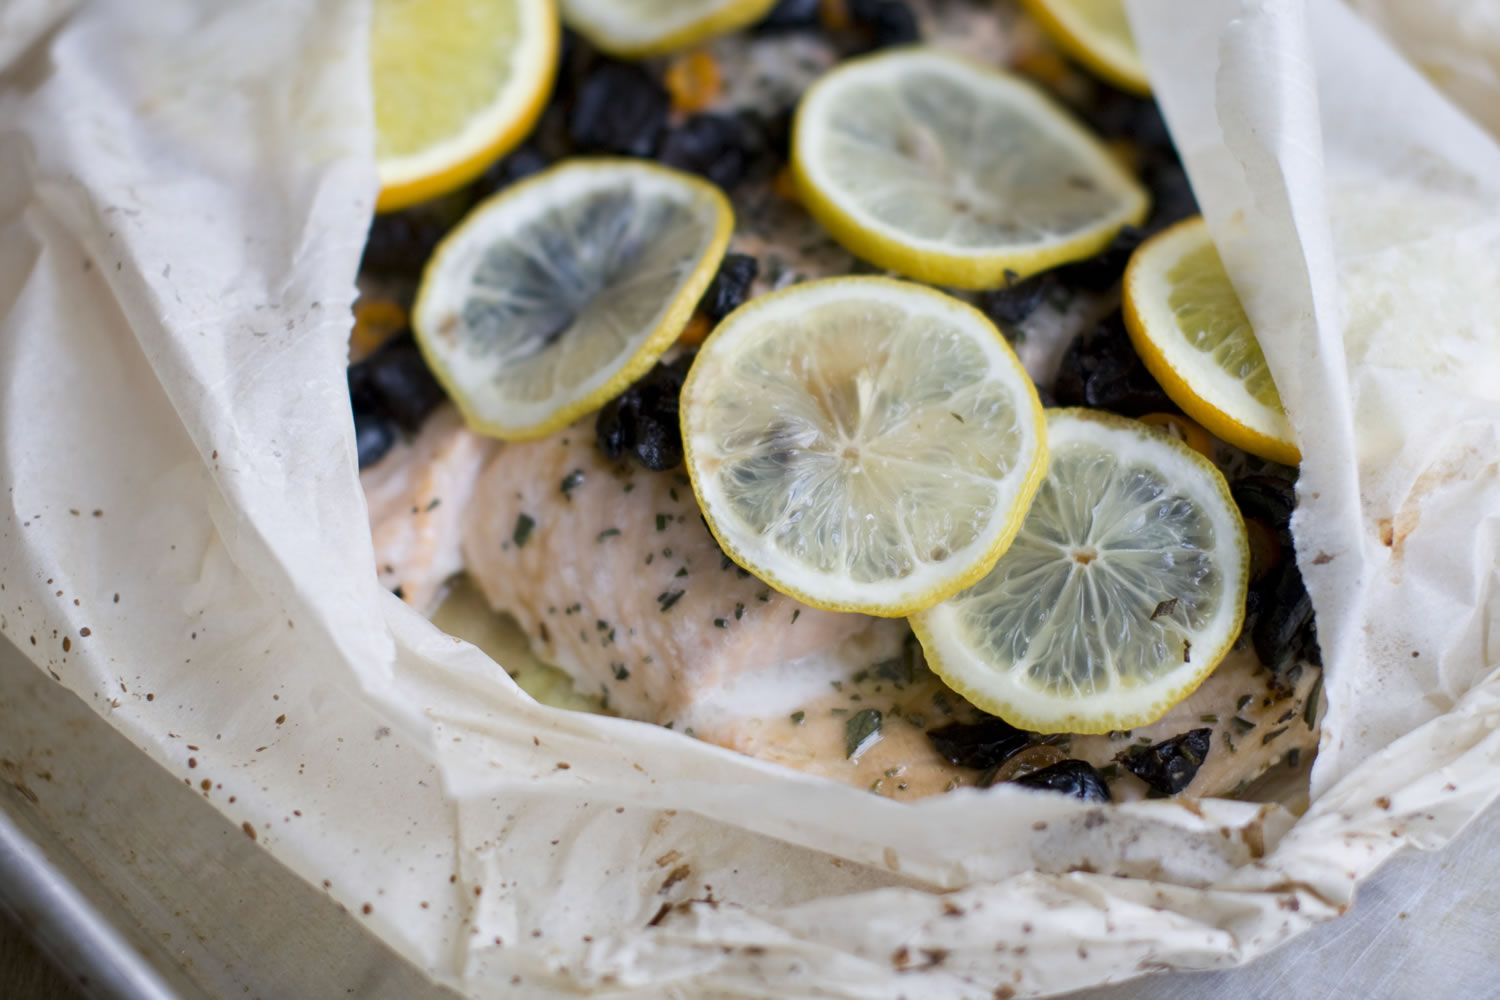 Salmon baked in a bag with citrus, olive and chilies